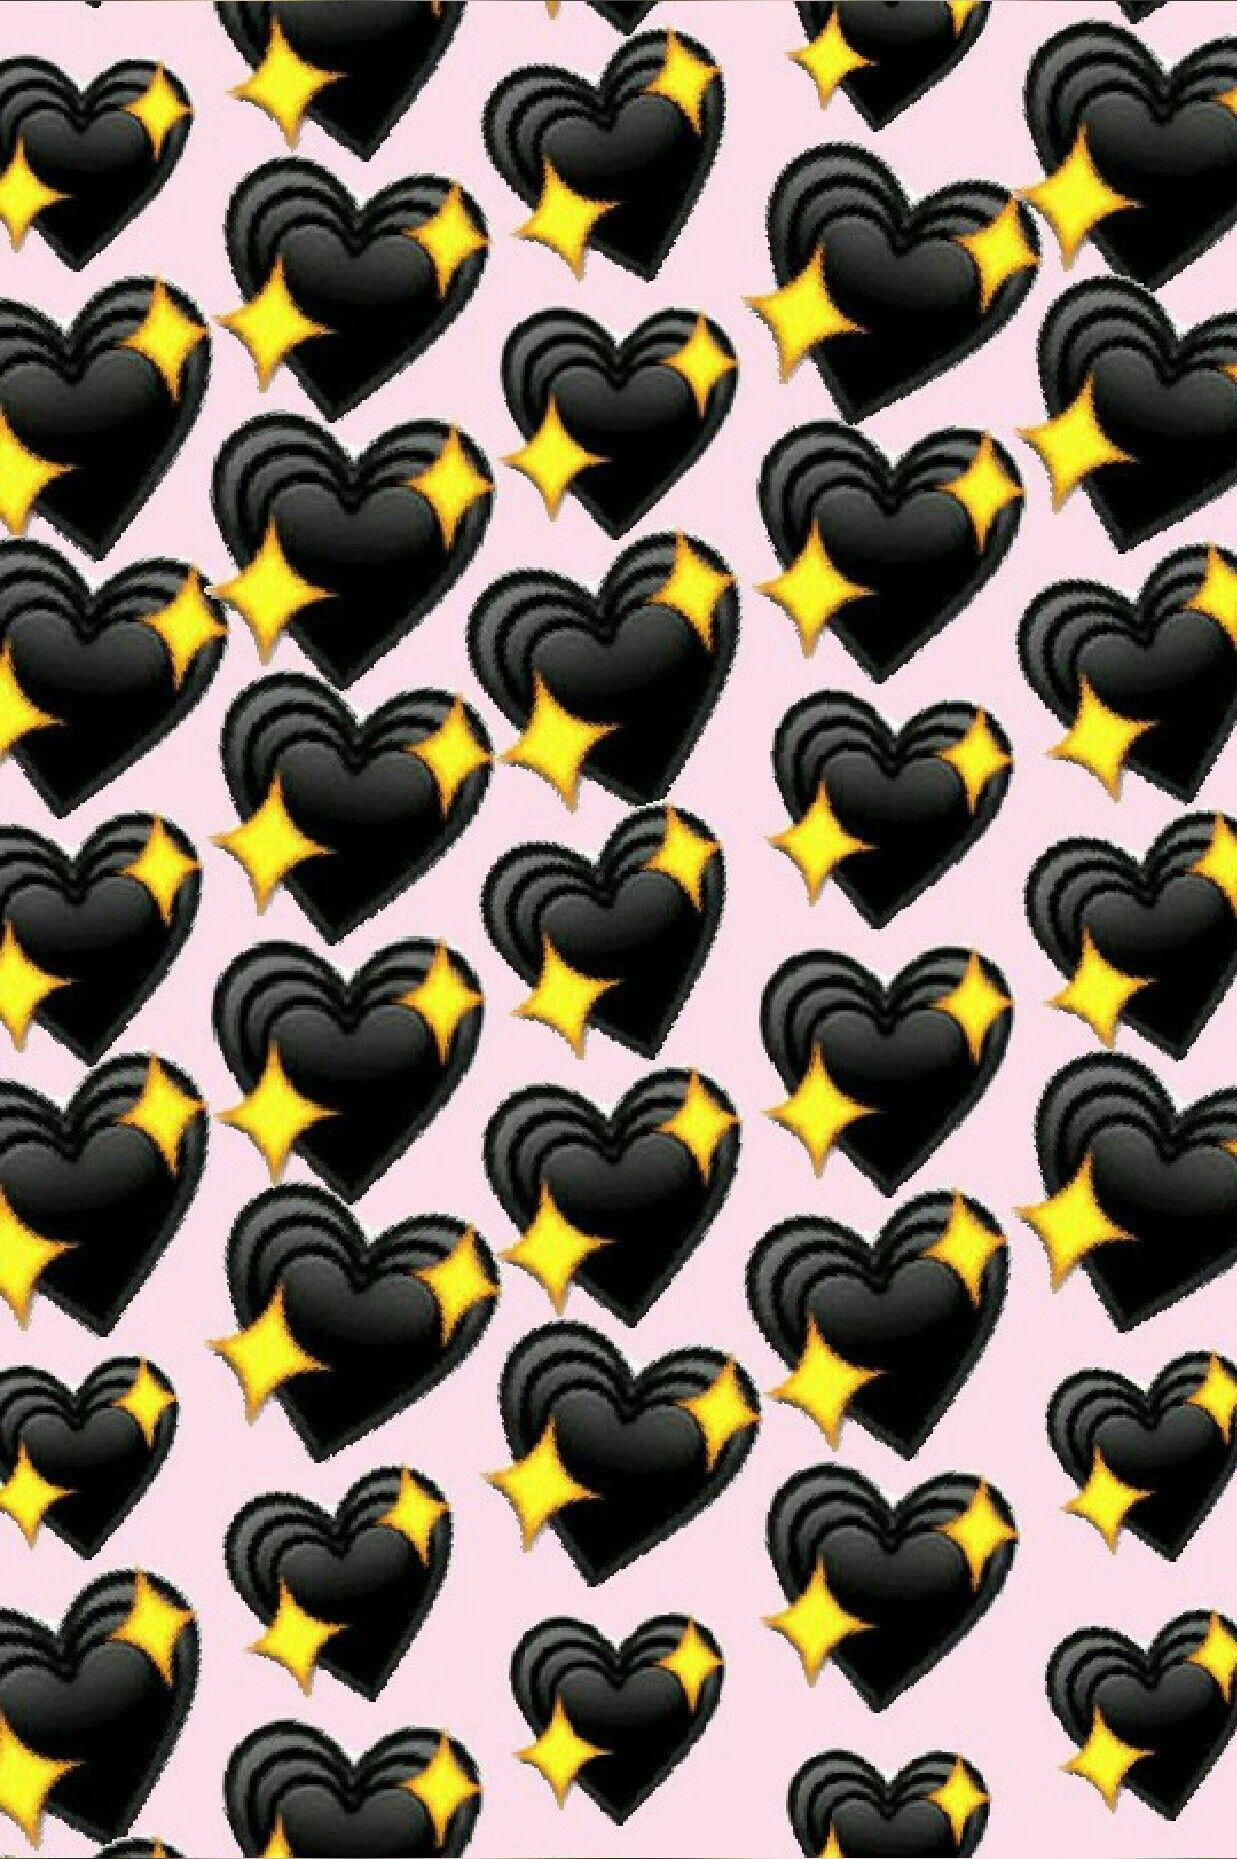 Download Just a heart iphone wallpaper - Abstract love wallpaper- For  Mobile Phone